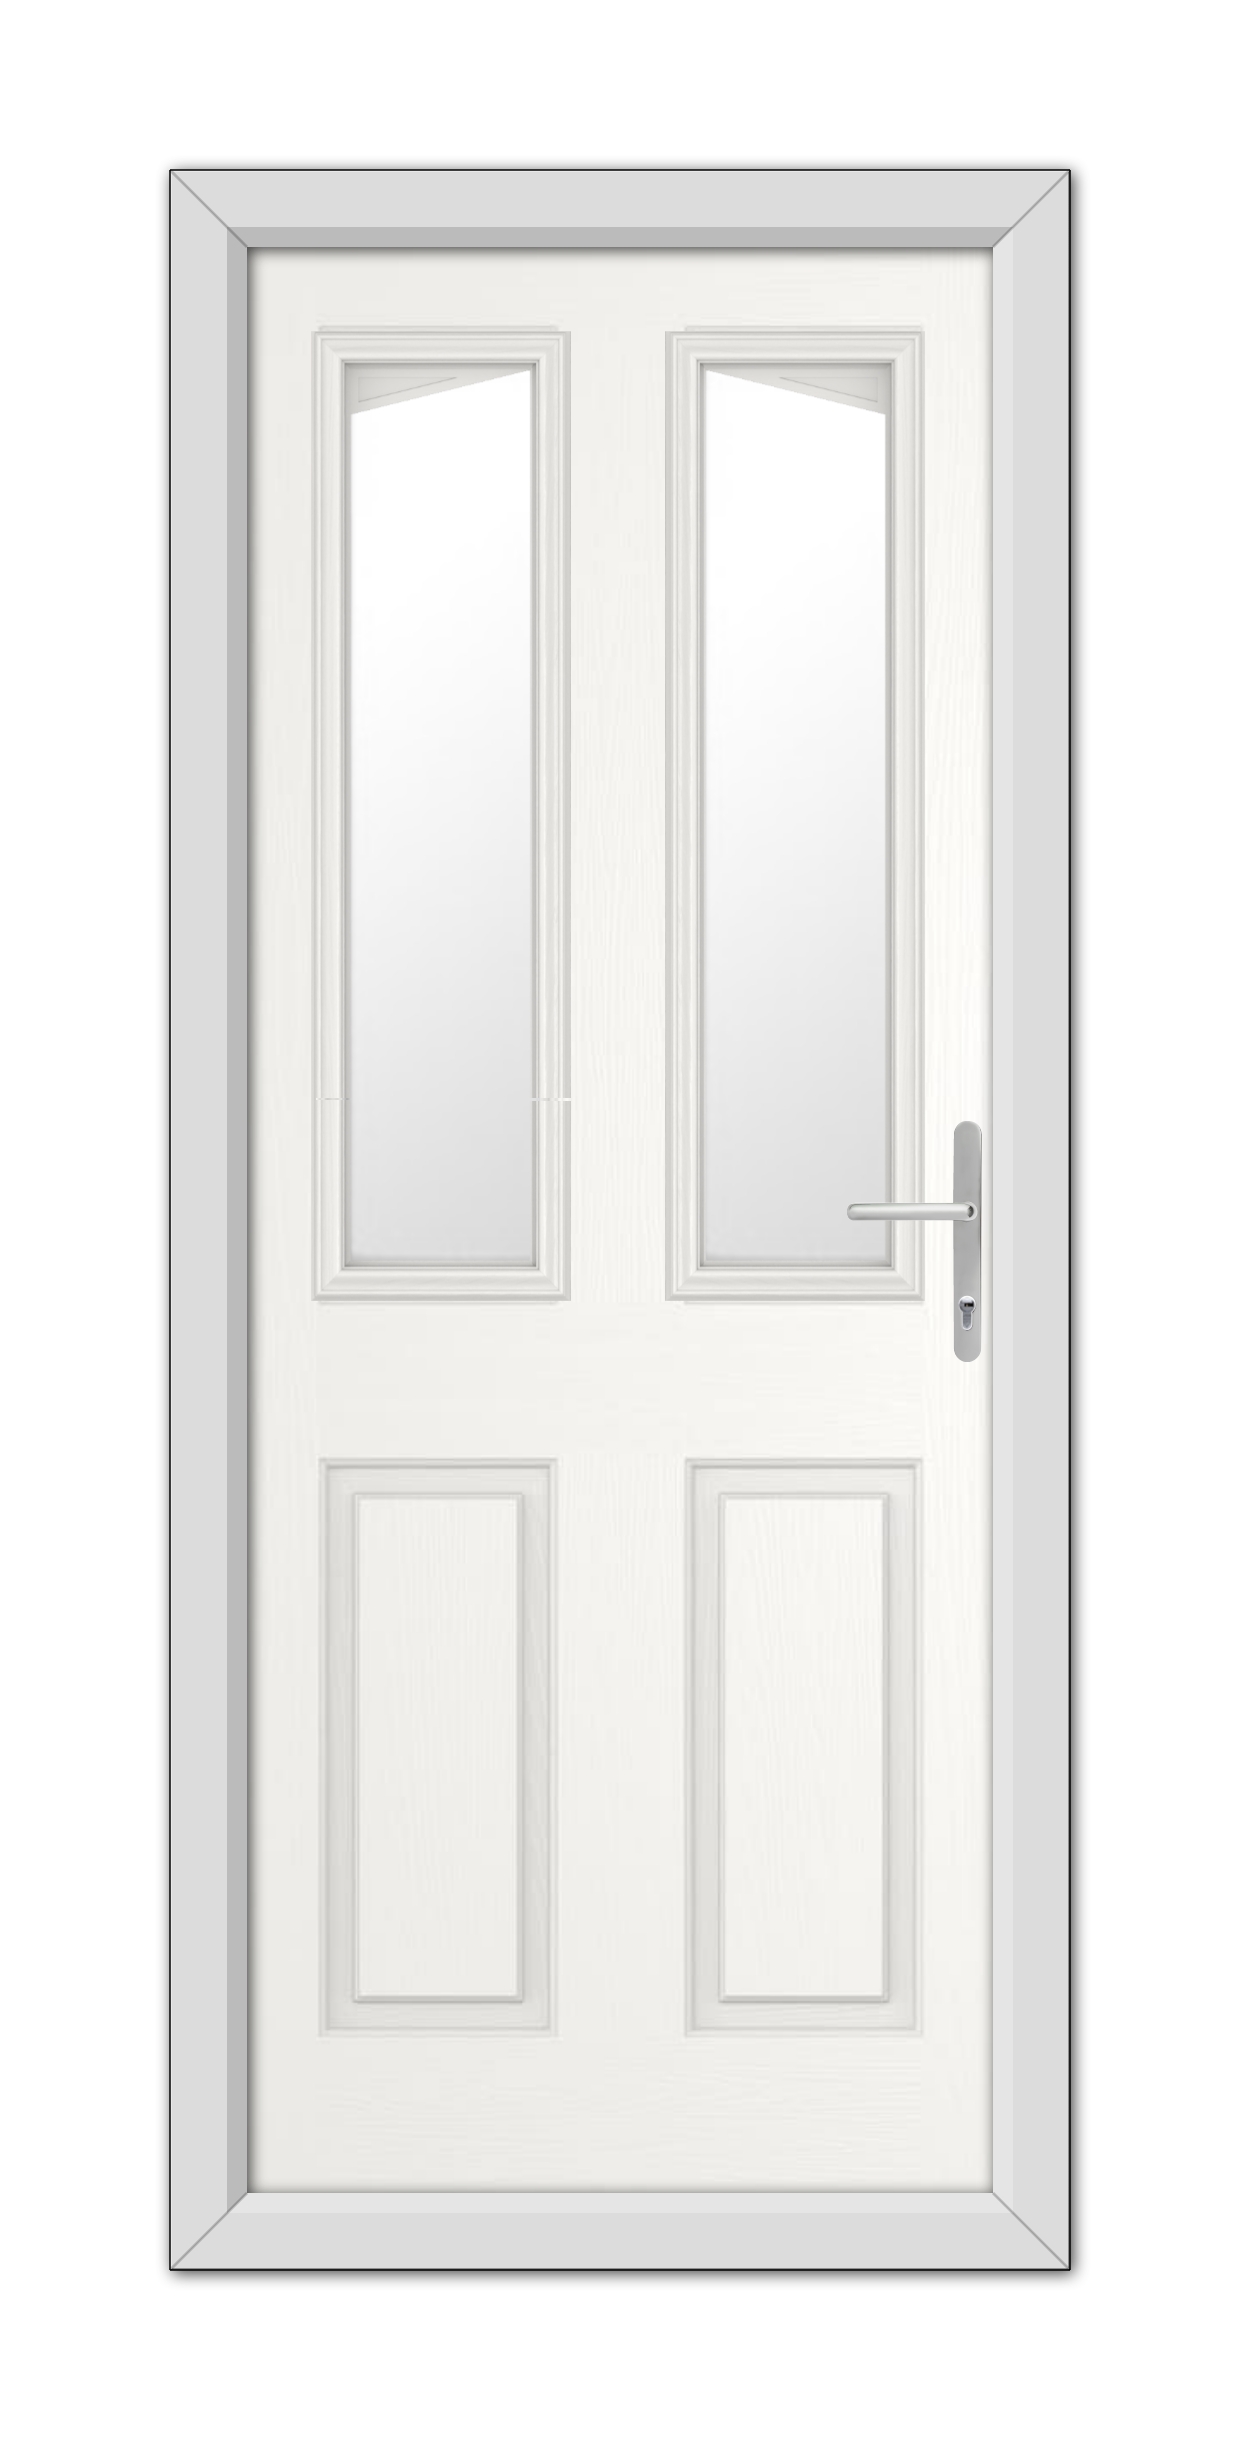 A White Highbury Composite Door 48mm Timber Core with rectangular panels and a metallic handle, set within a grey frame, isolated on a white background.